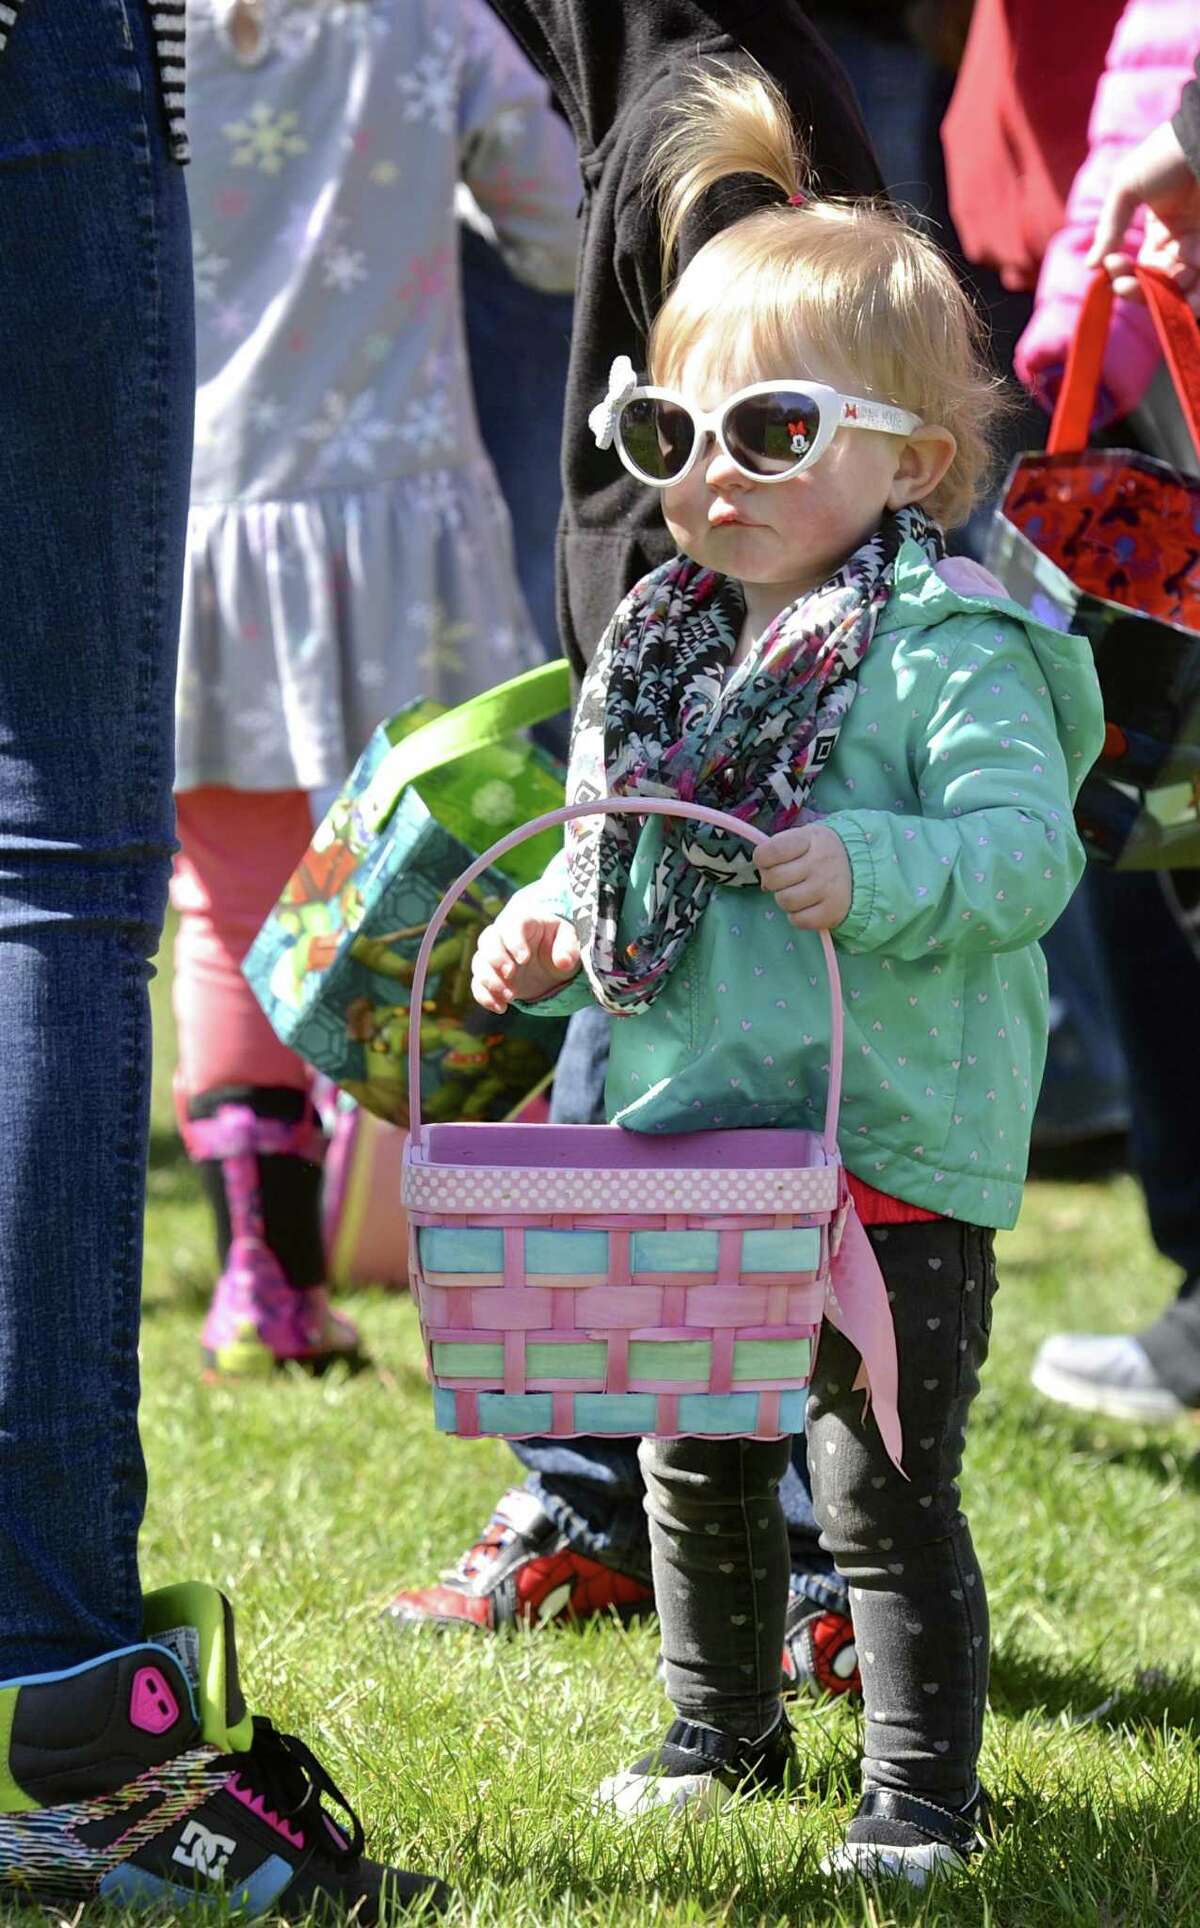 Wearing cool shades 16 month old Abigail Downs, of Danbury, waits with her basket for the start of the Tatiane before the 2017 Macaroni Kid Easter Egg Hunt, held at Tarrywile Park, in Danbury, Conn, on Saturday afternoon, April 8, 2017.